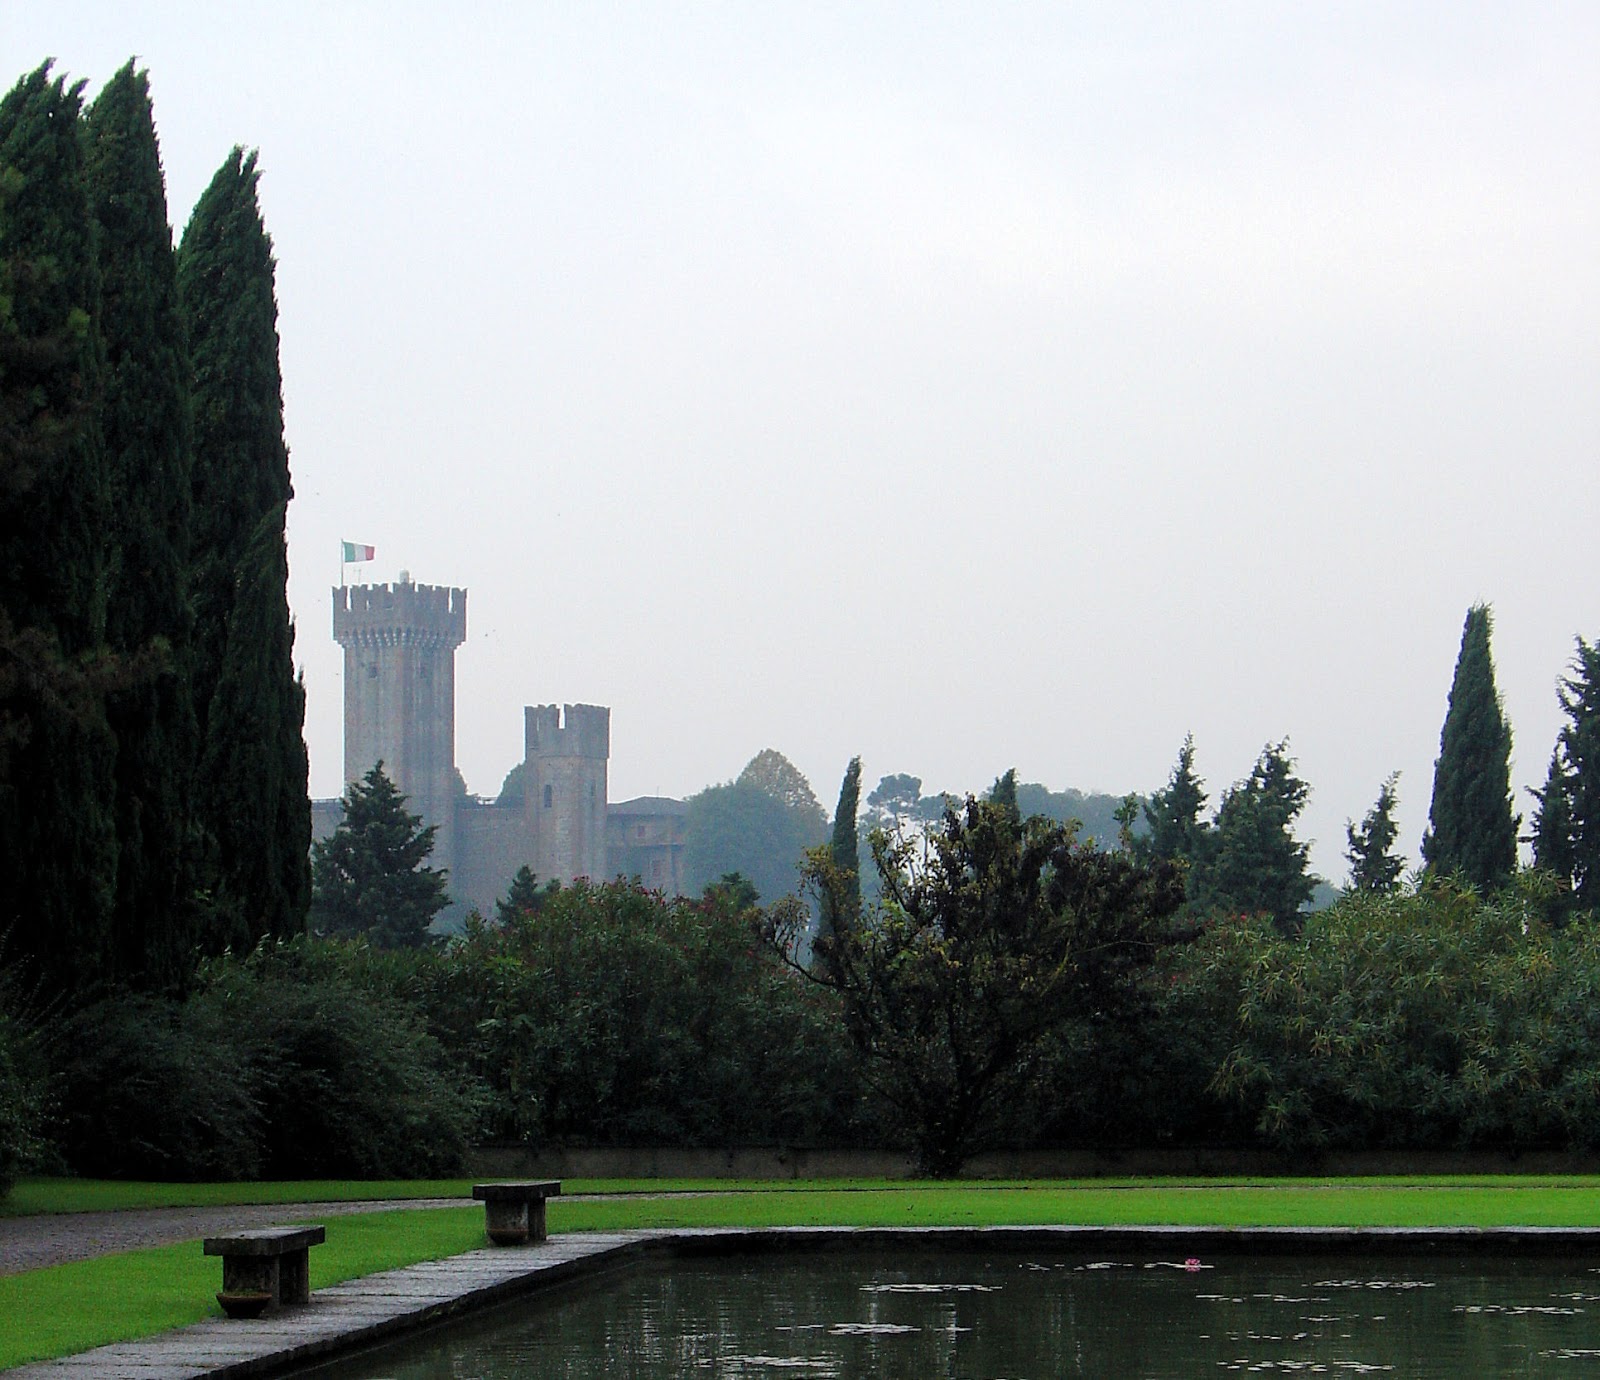 The Scaligero Castle aka The Fortress looms over the Parco Sigurtà and Borghetto beyond the ridge.